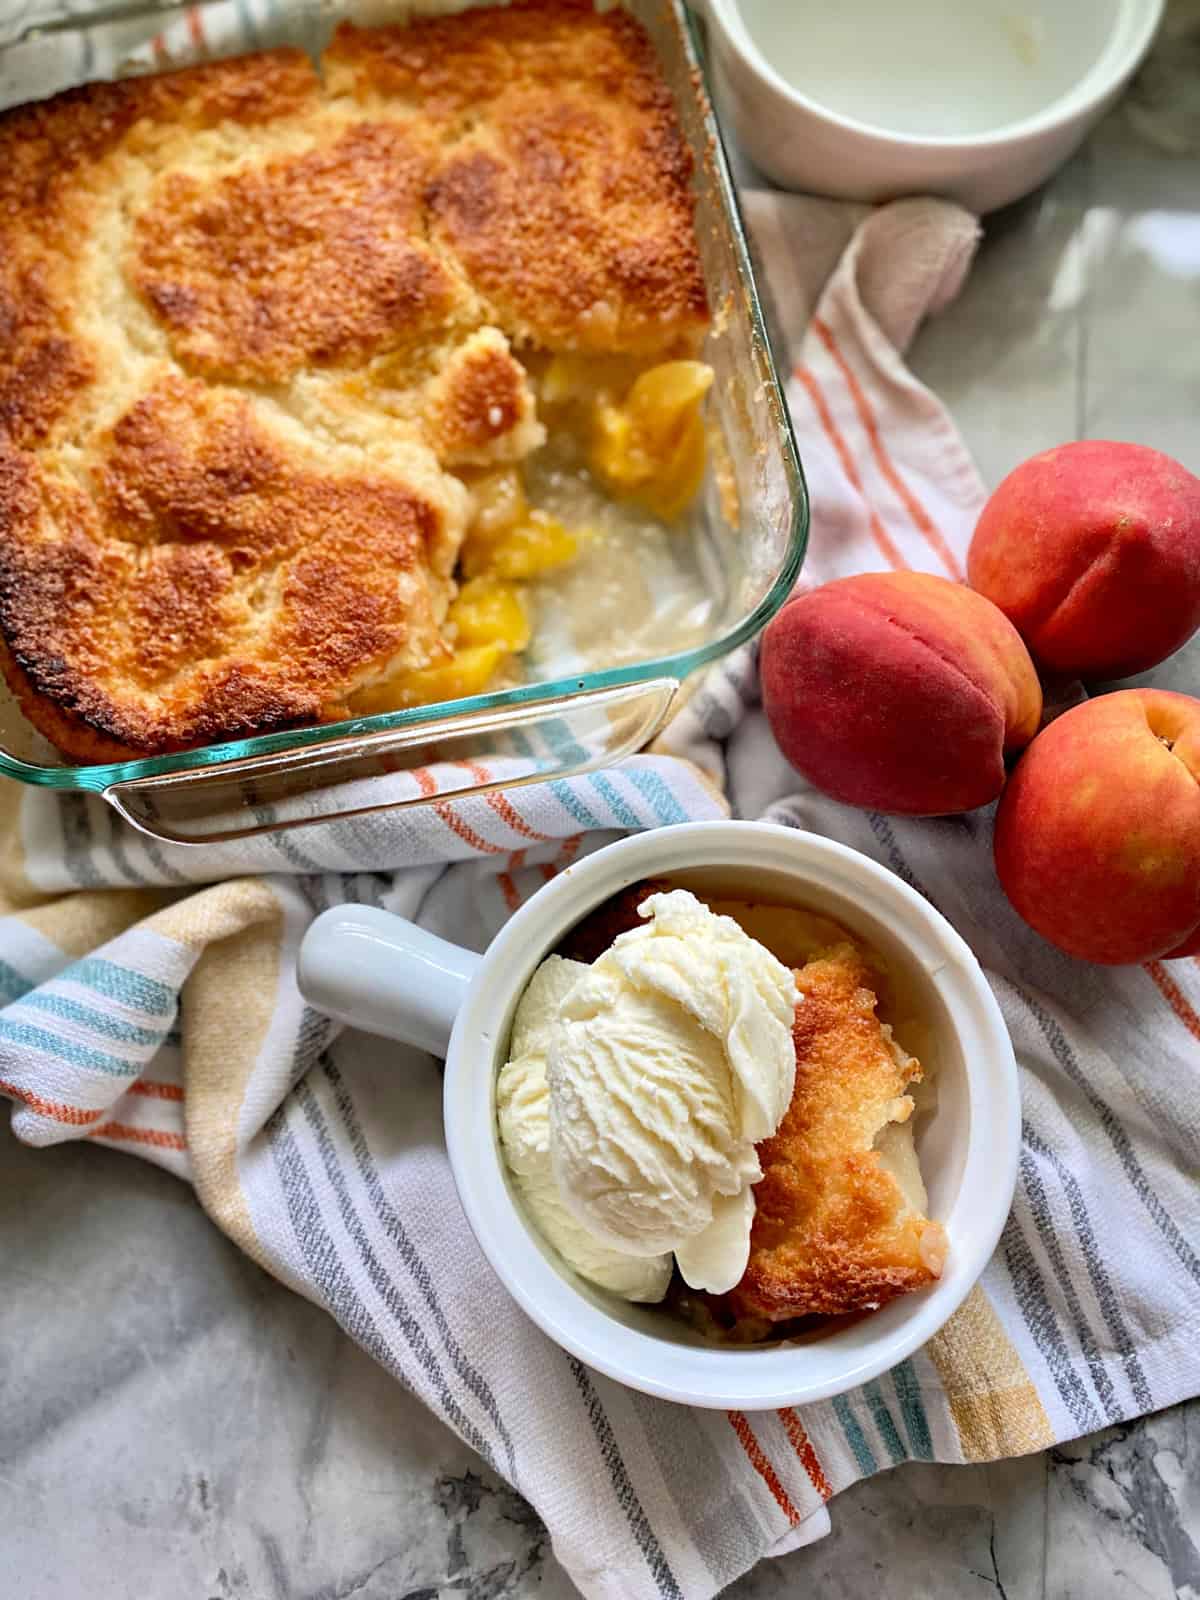 Top view of a white crock with ice cream and peach cobbler, a glass baking dish with peach cobbler, and fresh peaches next to it.